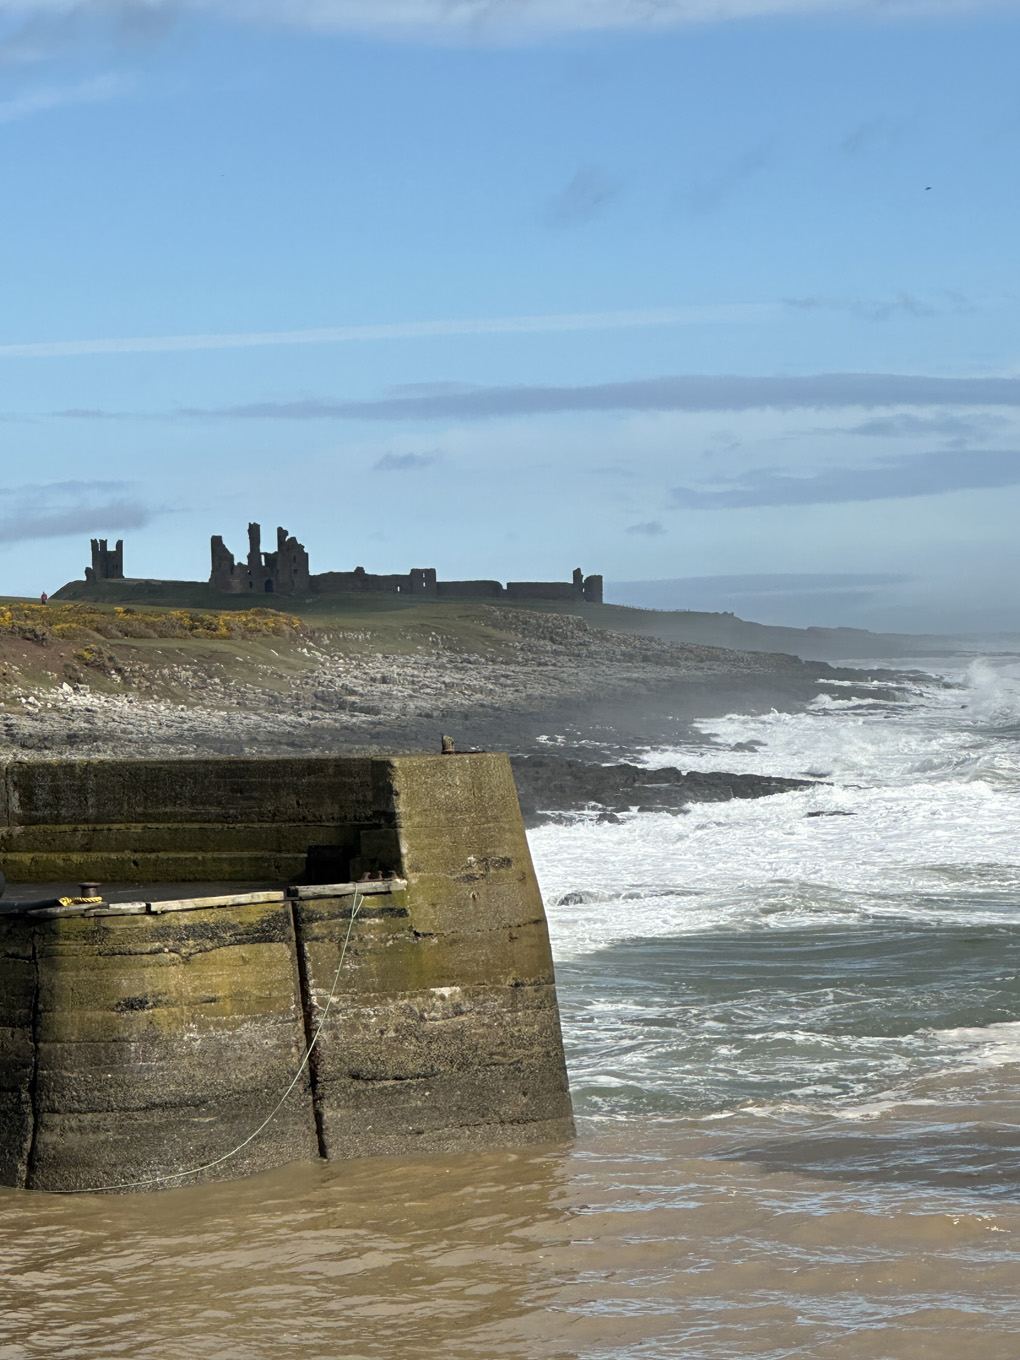 We see a view from Craster to Dunstaburgh Castle, Northumberland coast